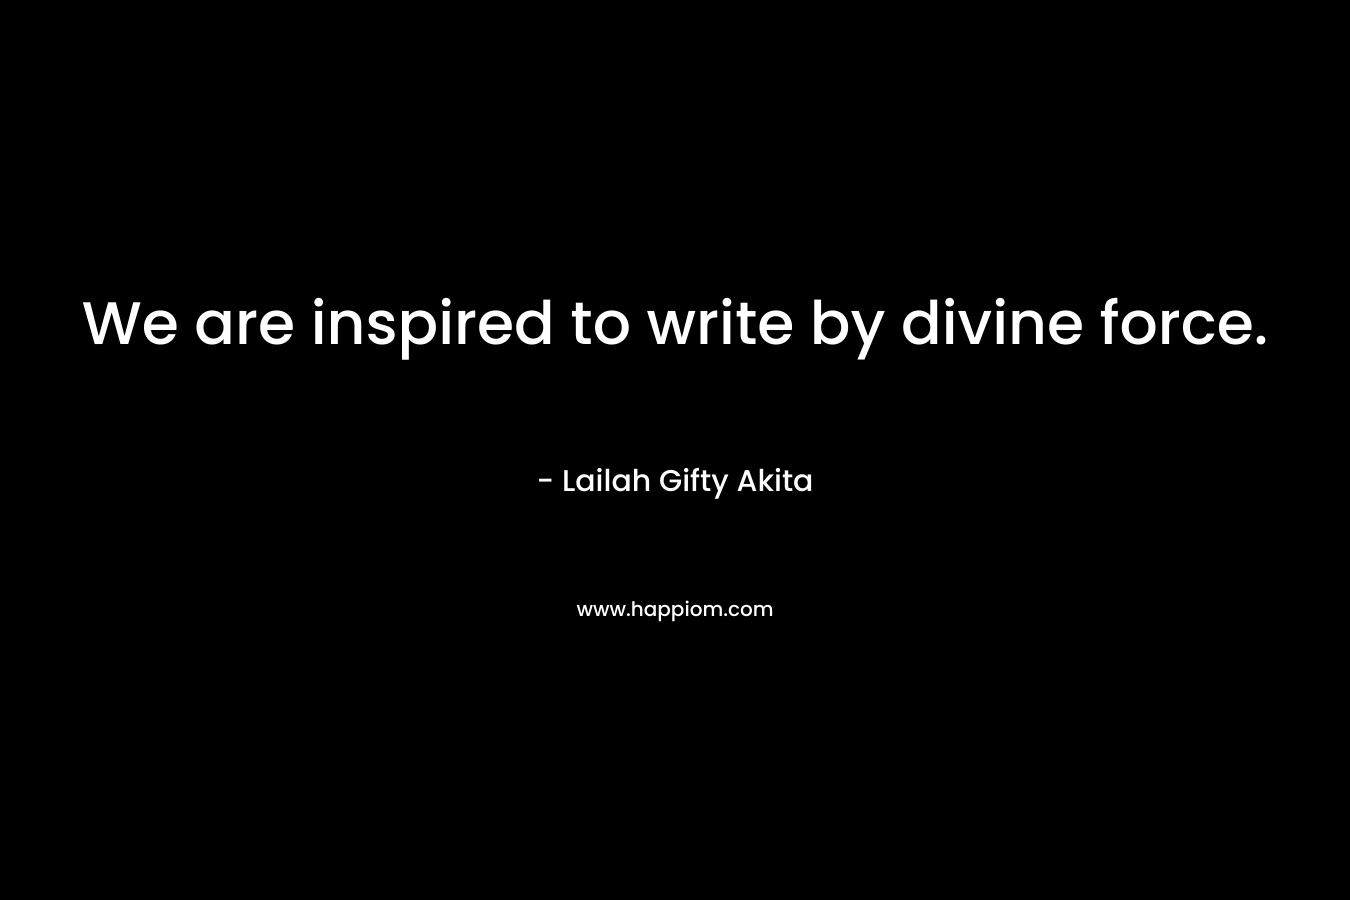 We are inspired to write by divine force.